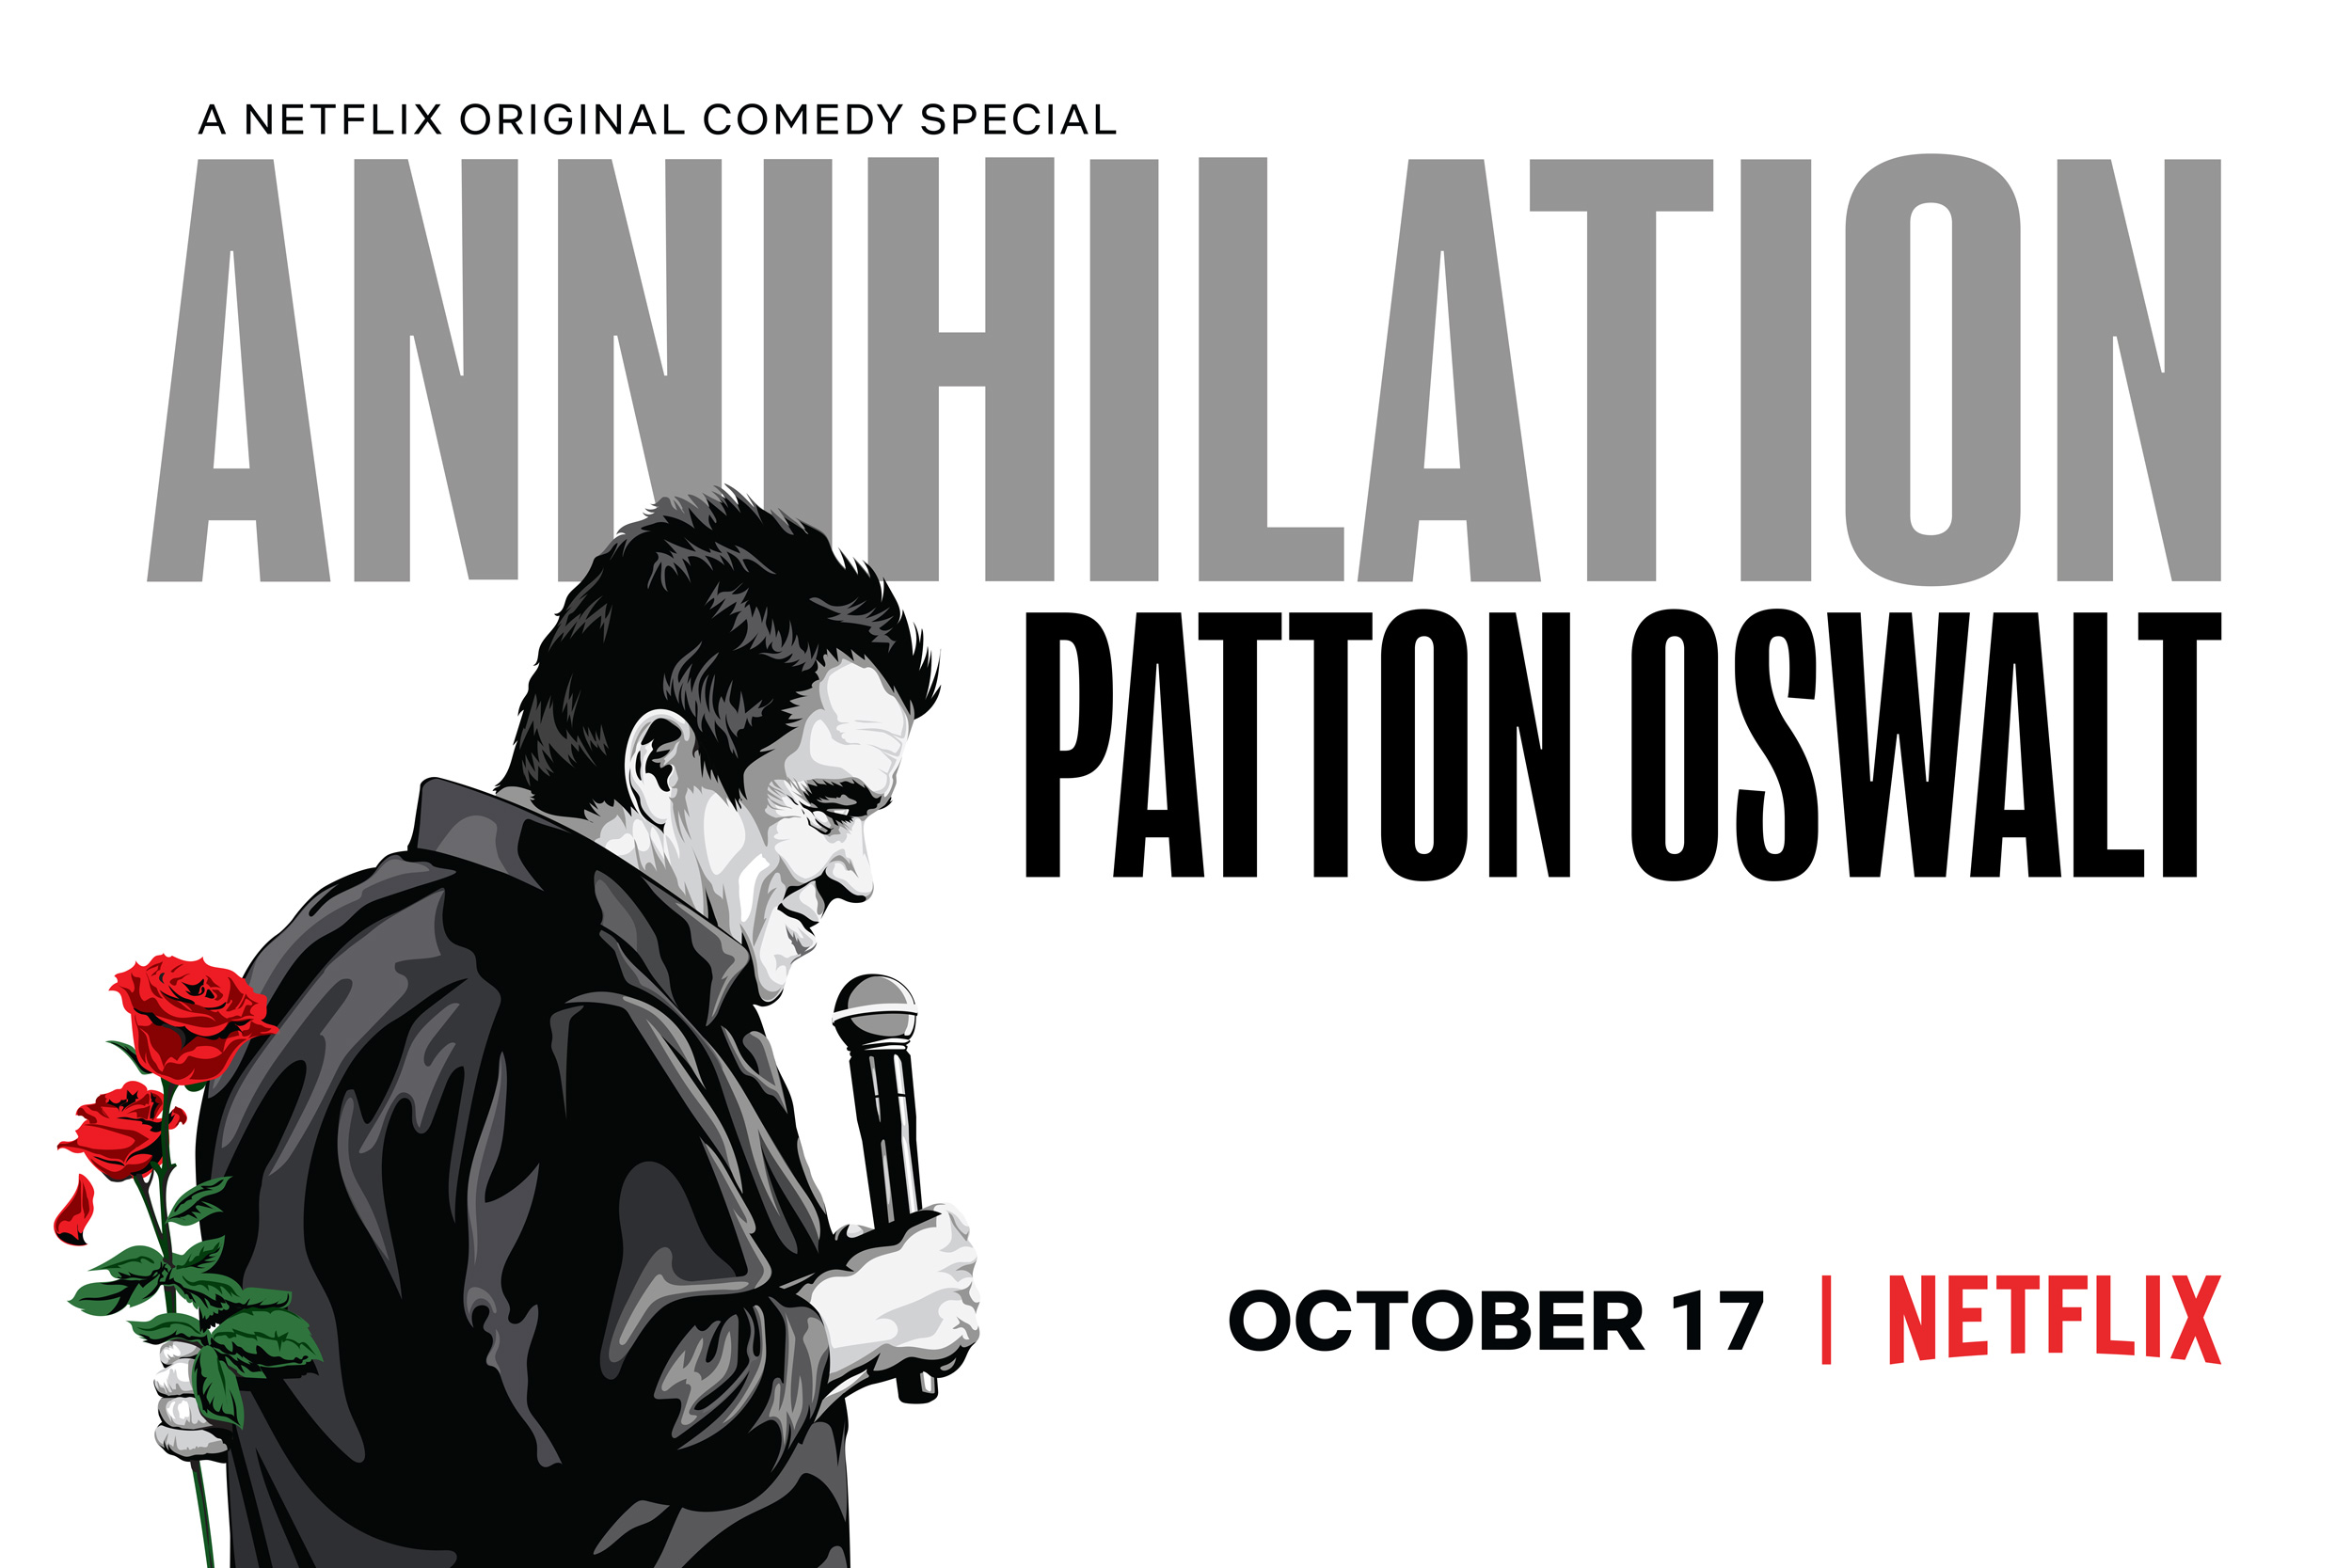 Watch The First Trailer For Patton Oswalts Next Netflix Special